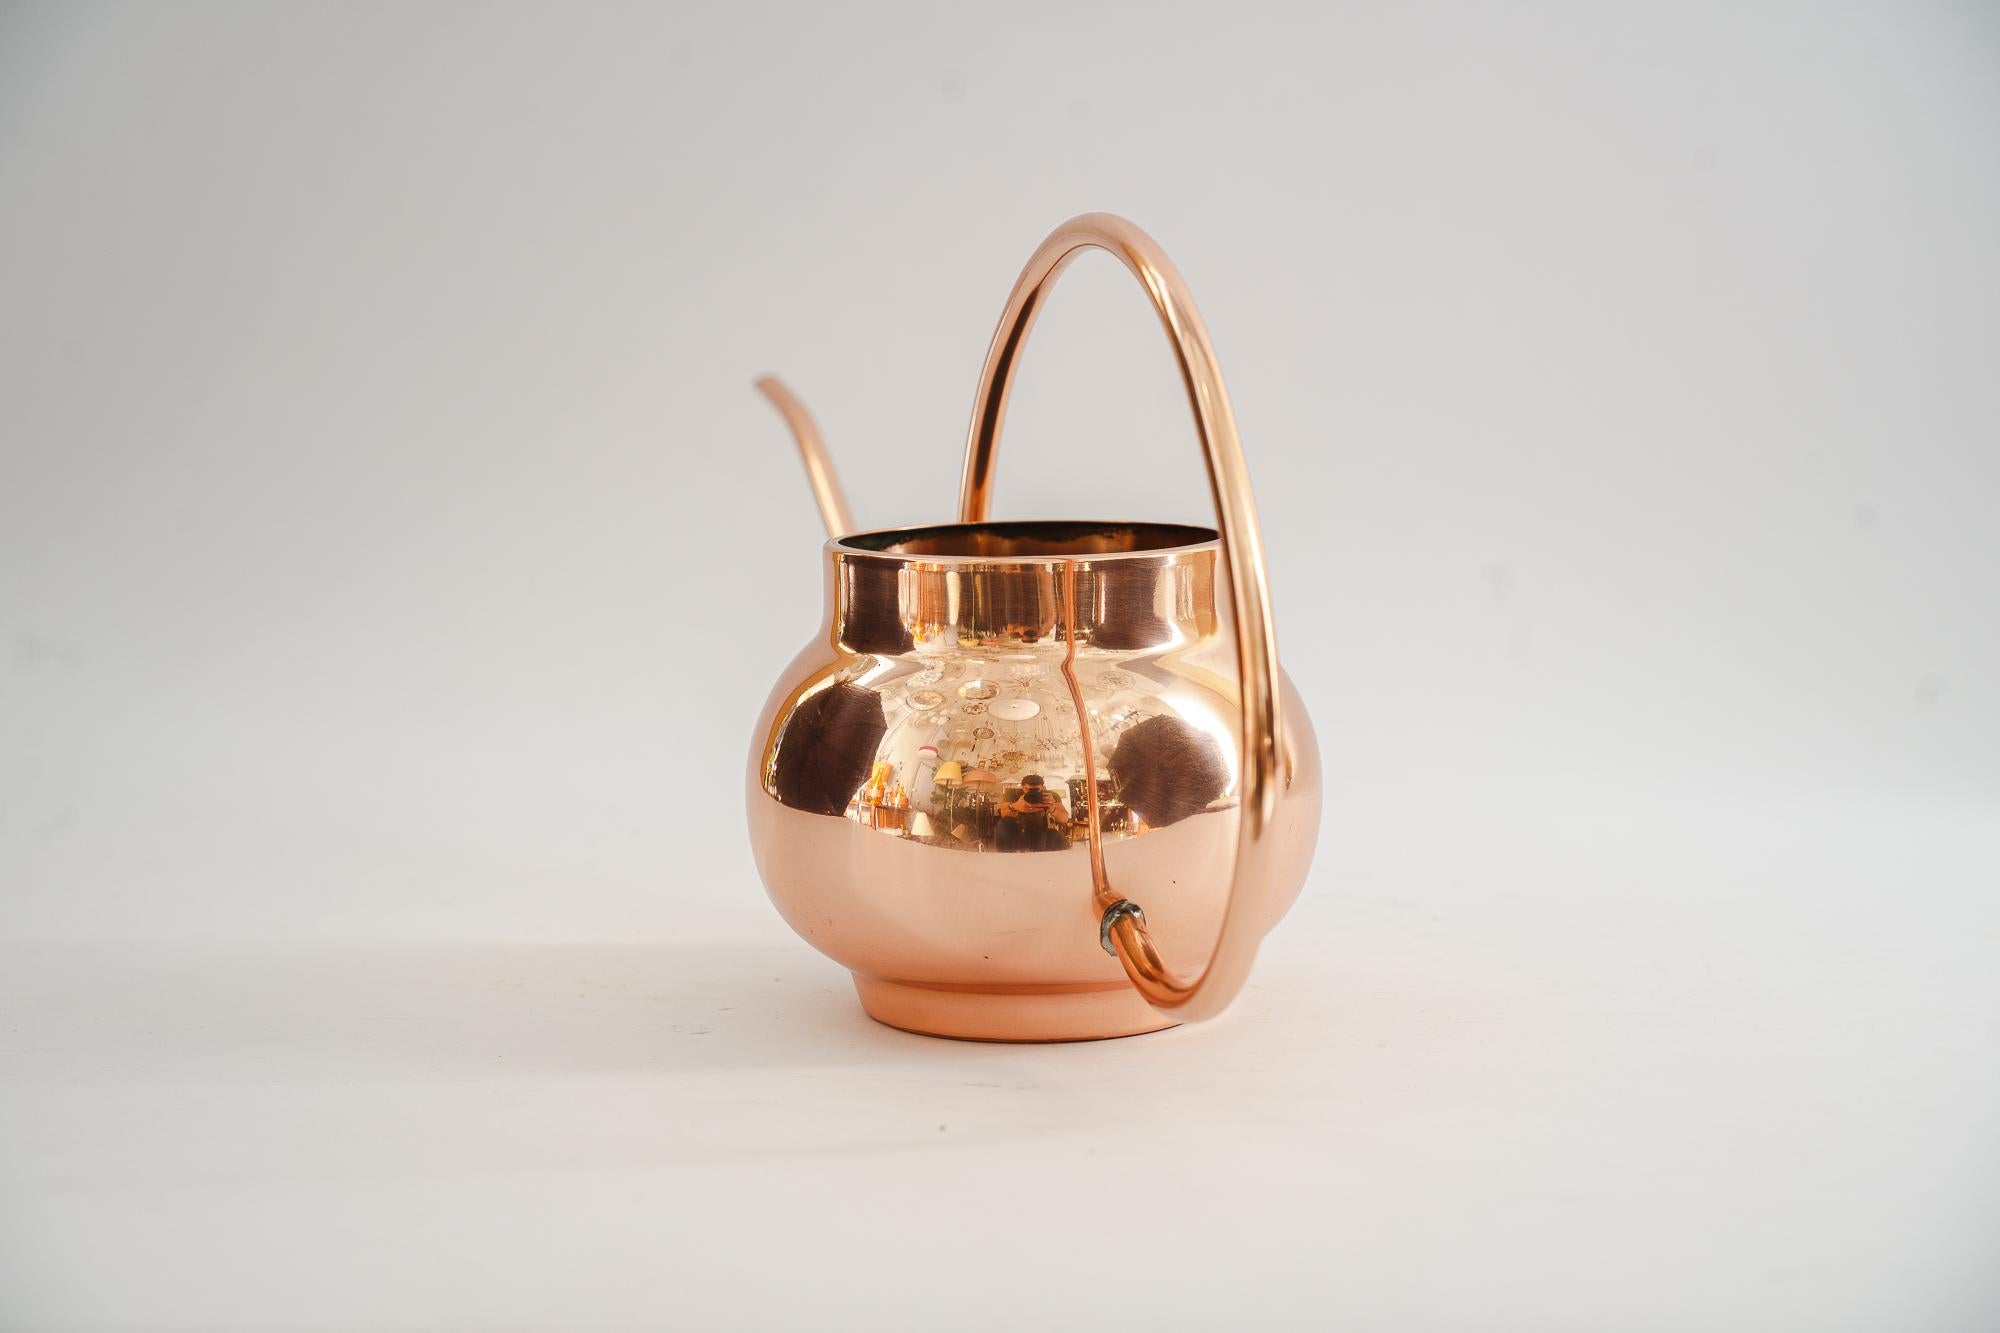 Copper watering can around 1950s
Polished and stove enameled.